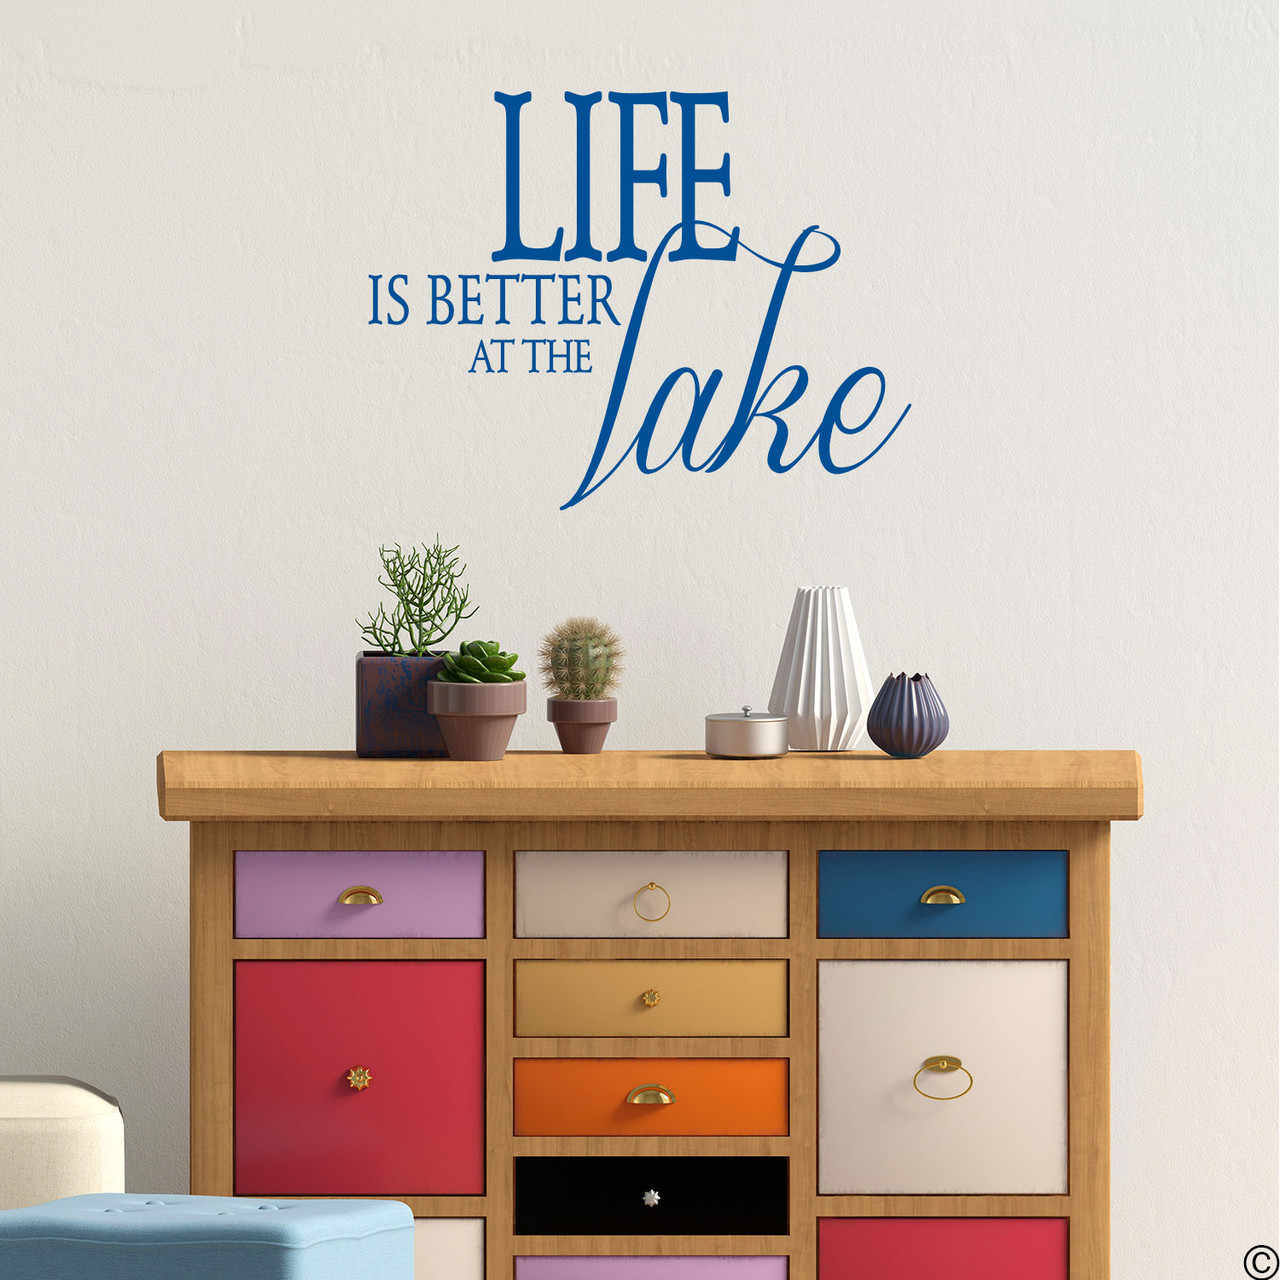 Life is better at the Lake wall decal, on a wall in the traffic blue vinyl color.